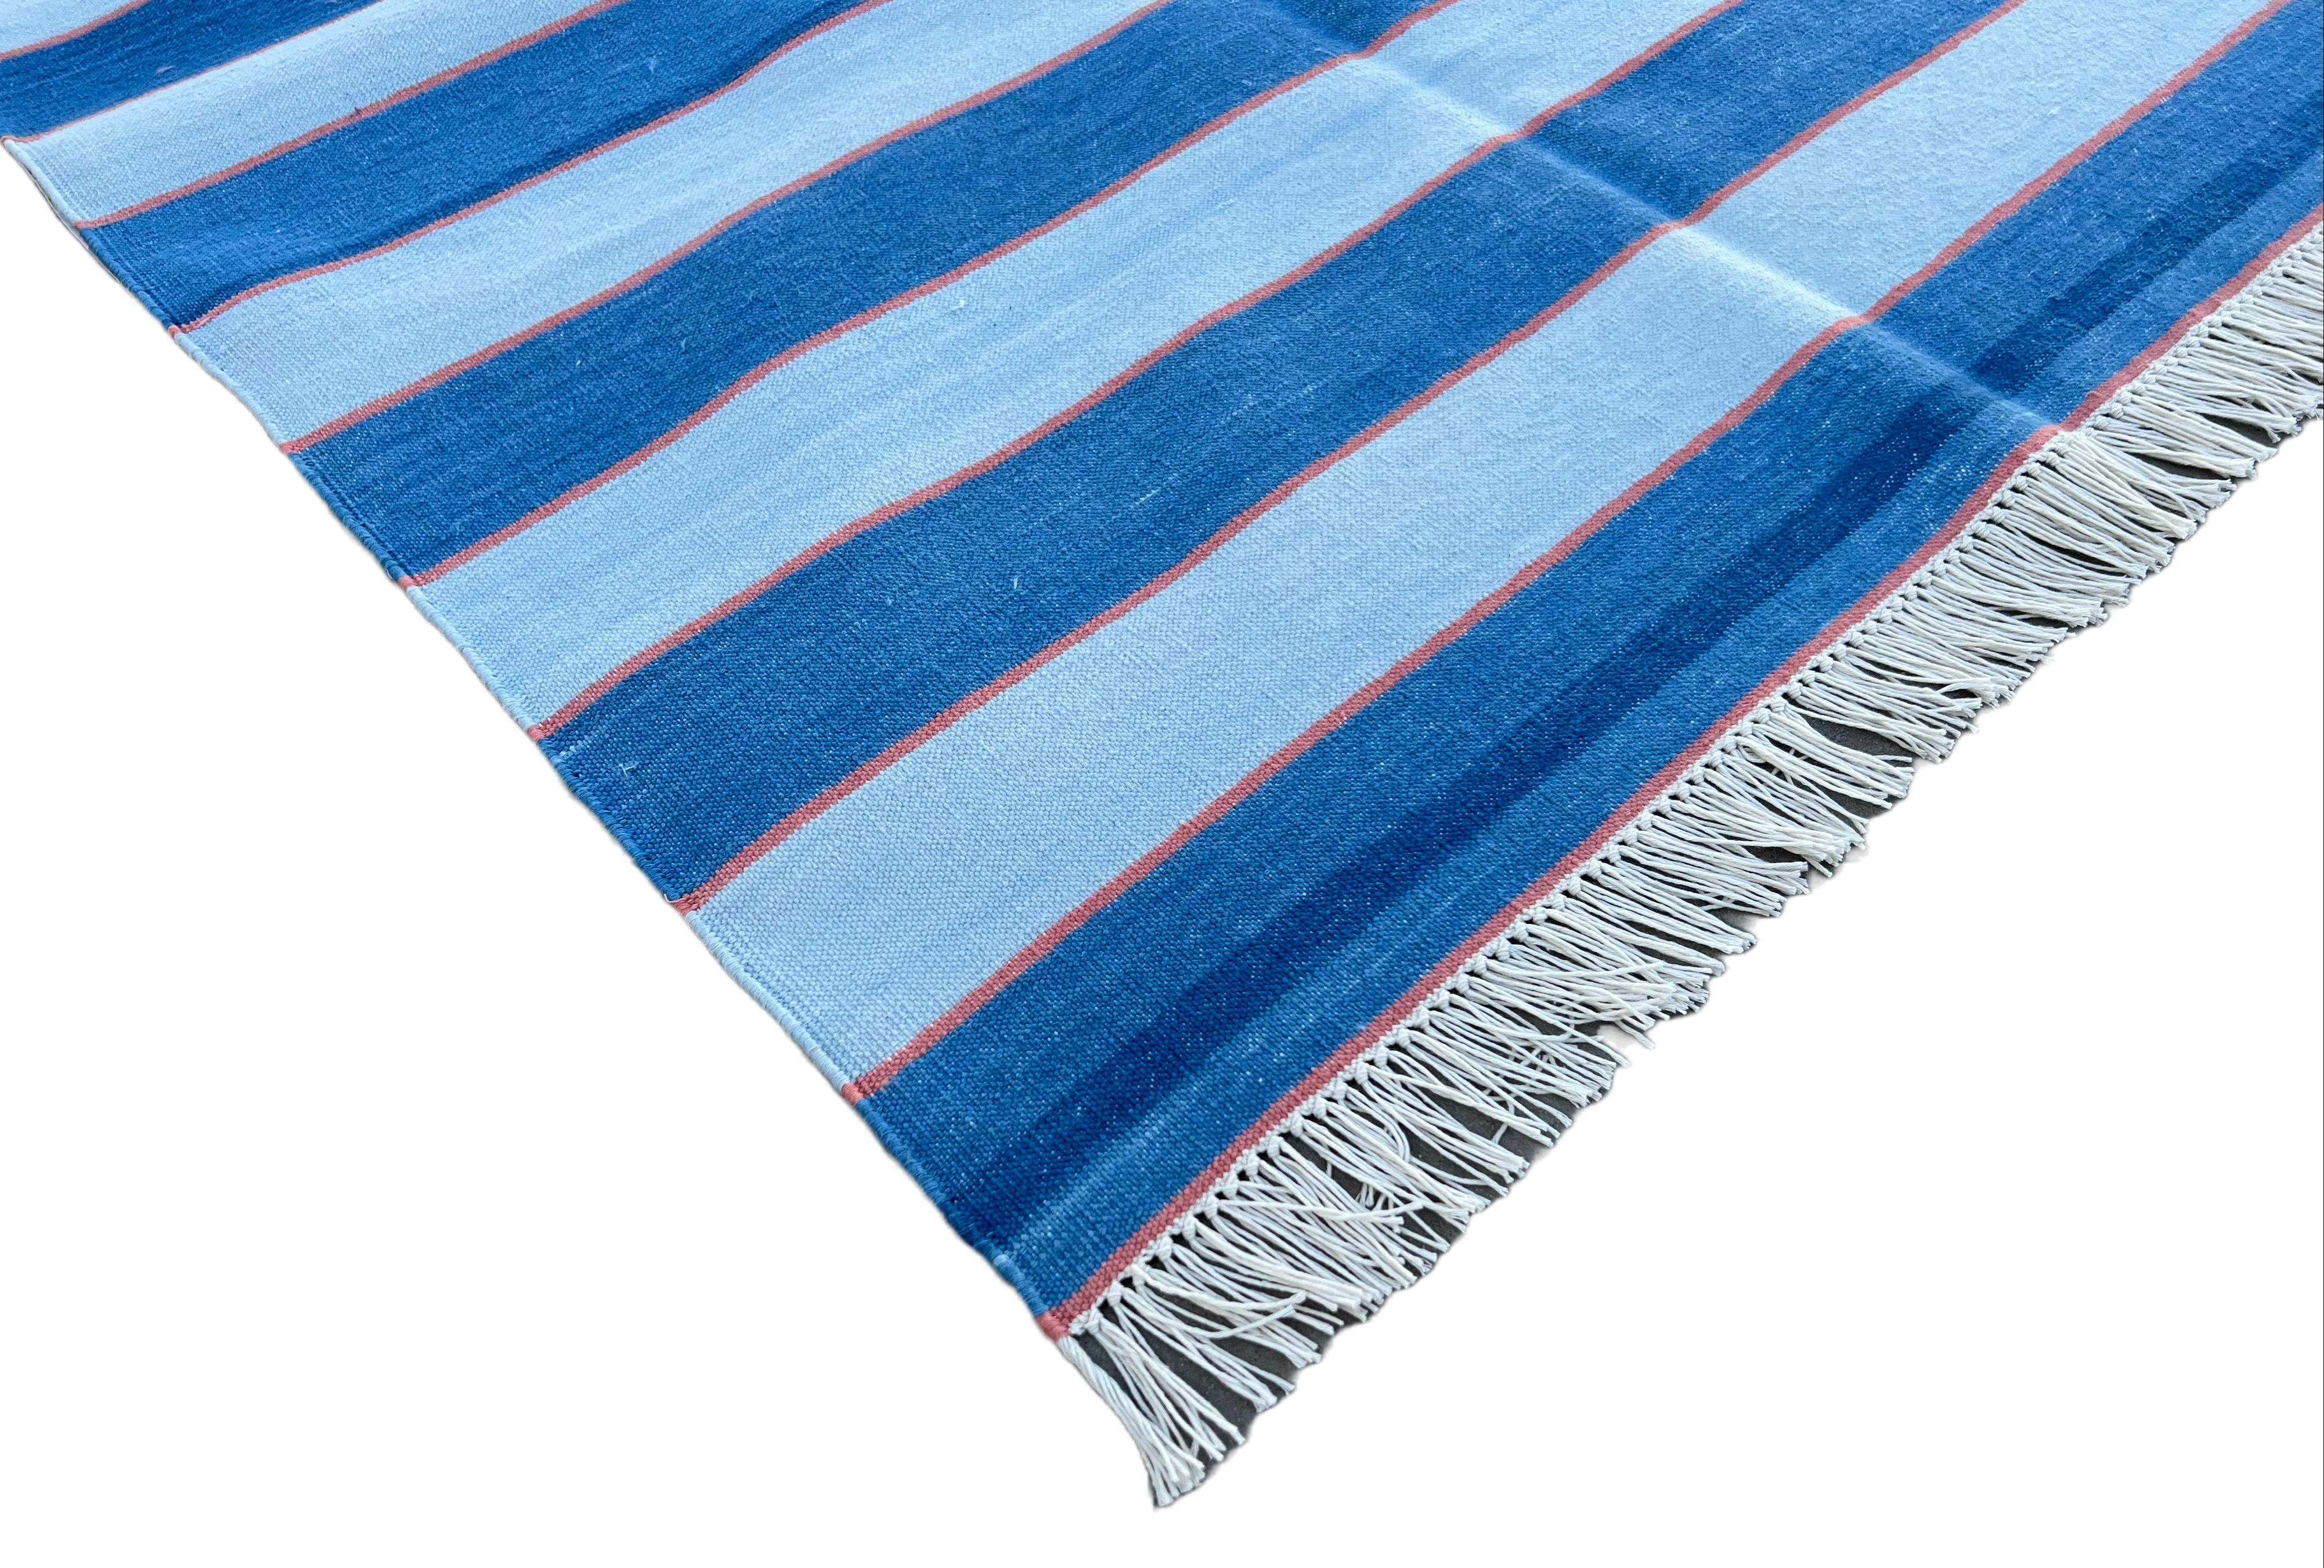 Mid-Century Modern Handmade Cotton Area Flat Weave Rug, 8x10 Blue And Orange Striped Indian Dhurrie For Sale